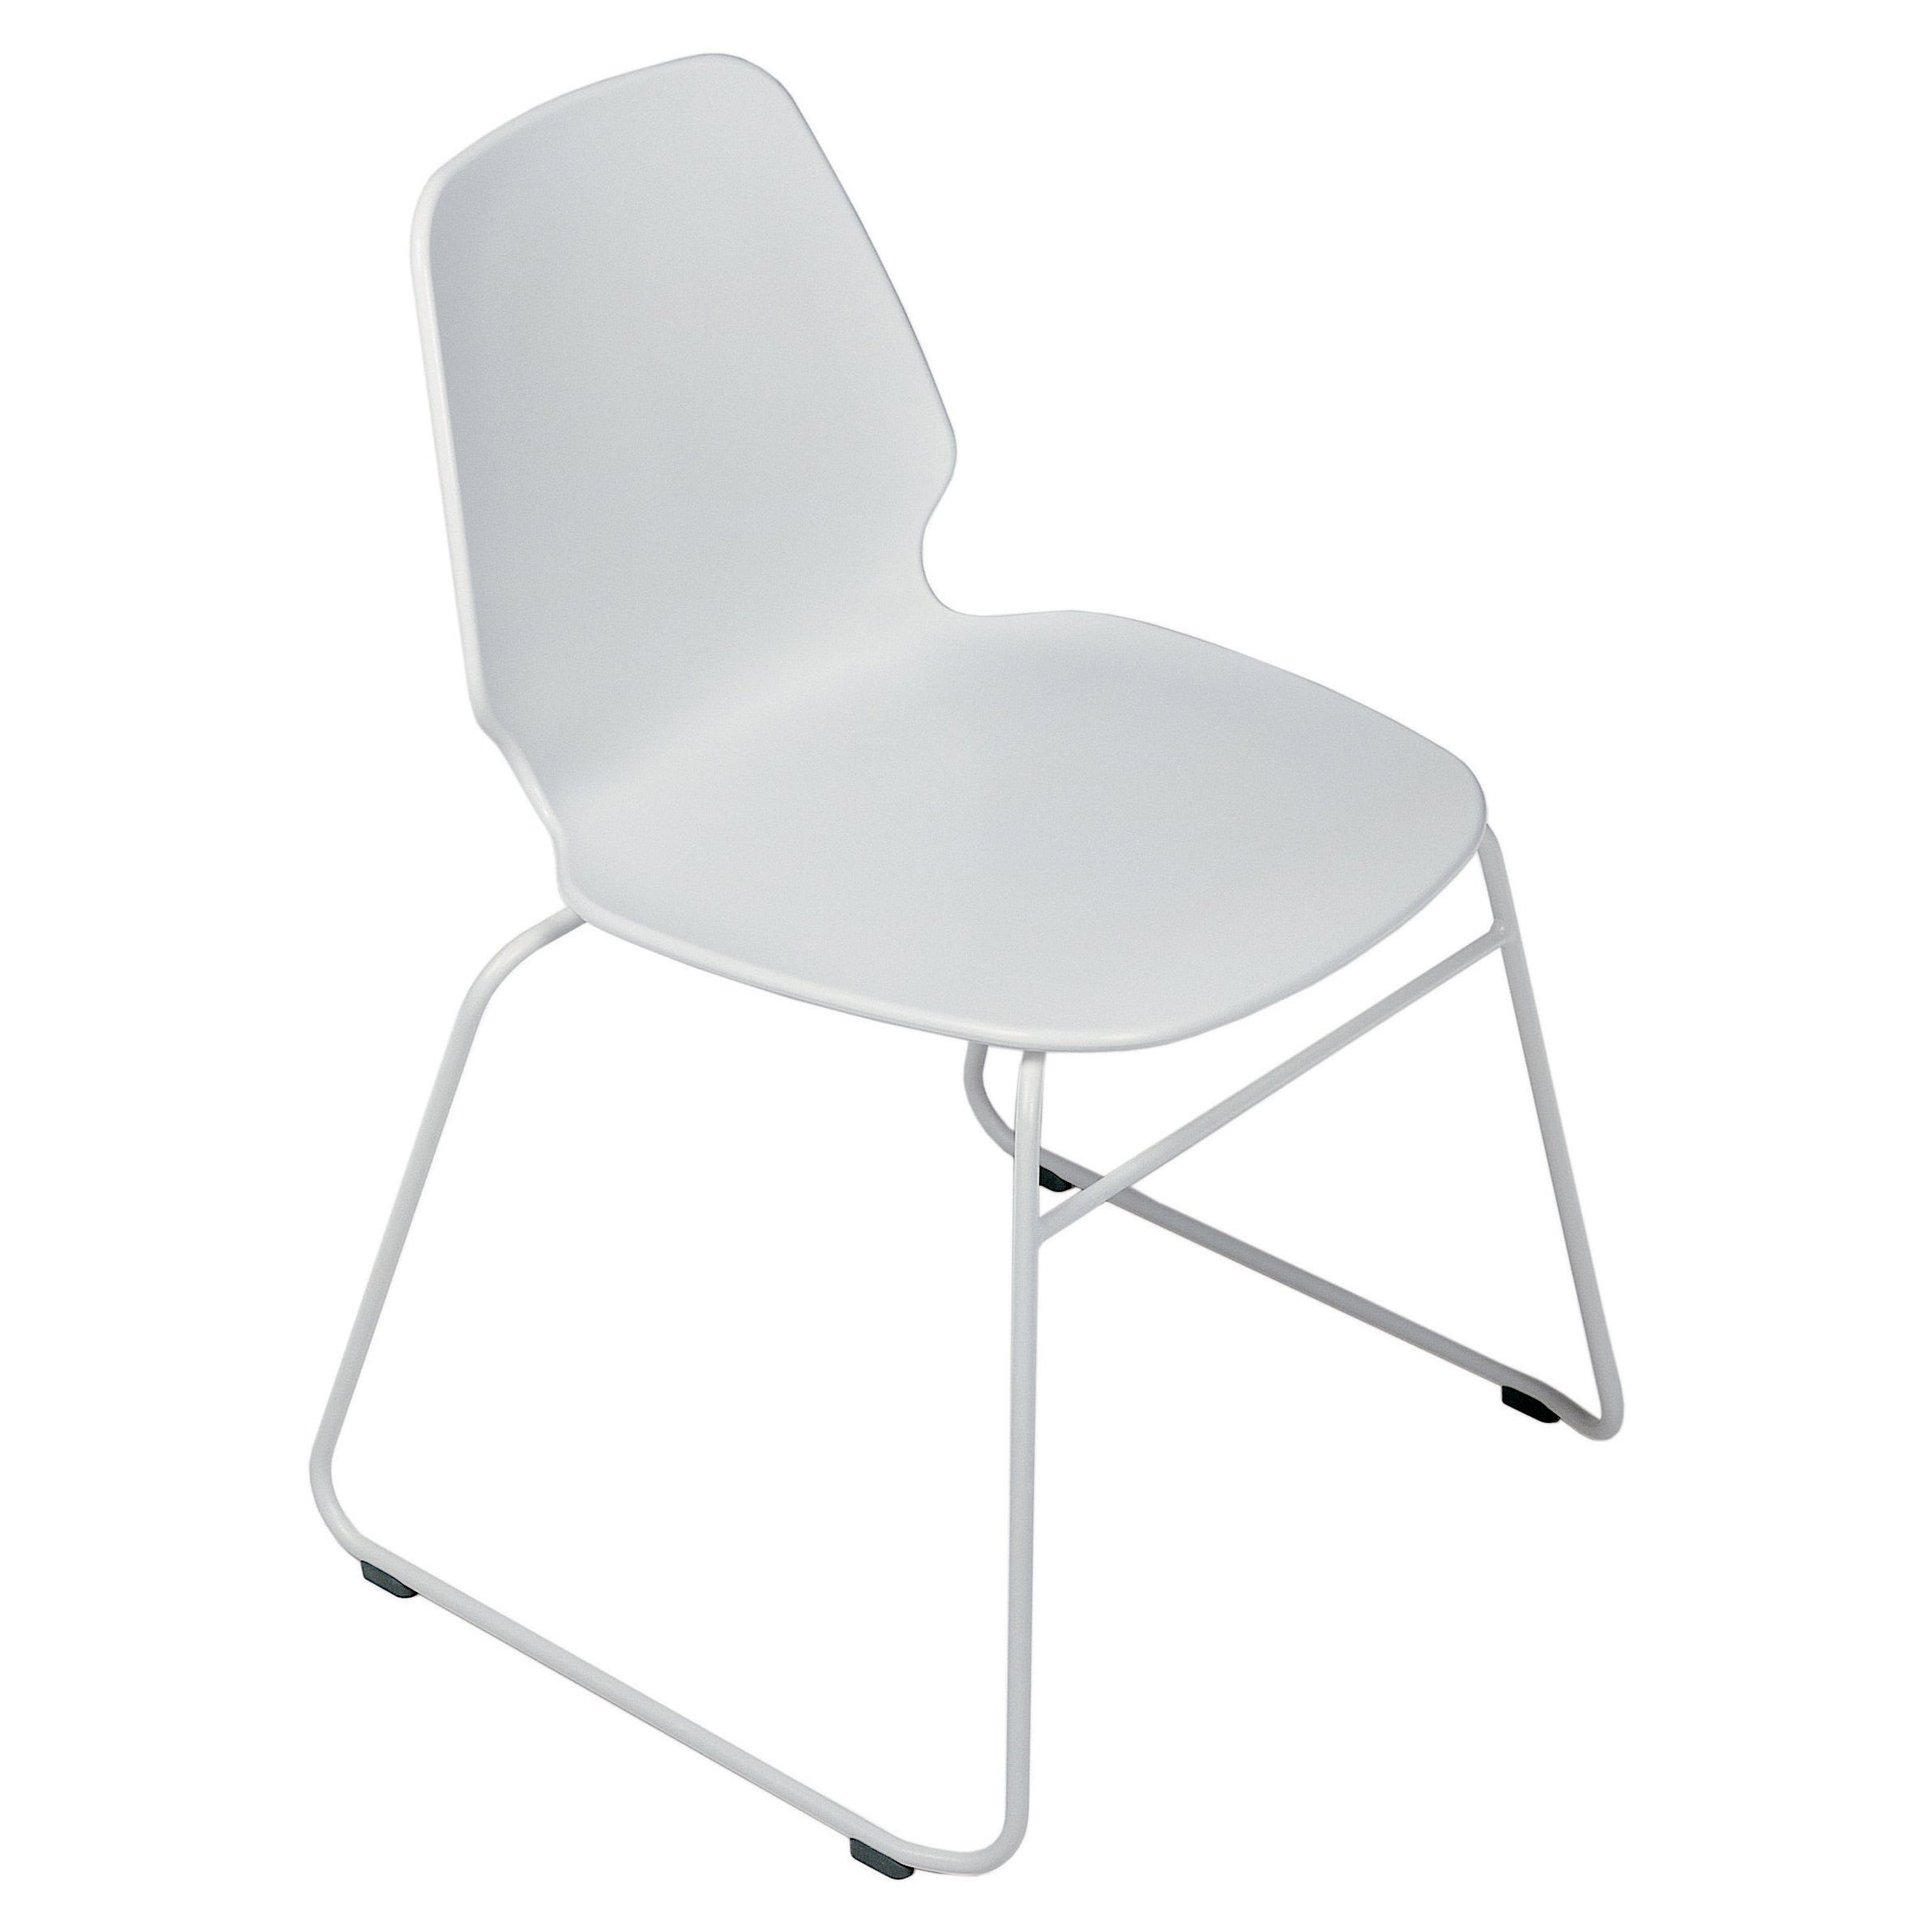 Alias 531 Selinunte Sledge Chair in White Seat and Lacquered Steel Frame For Sale